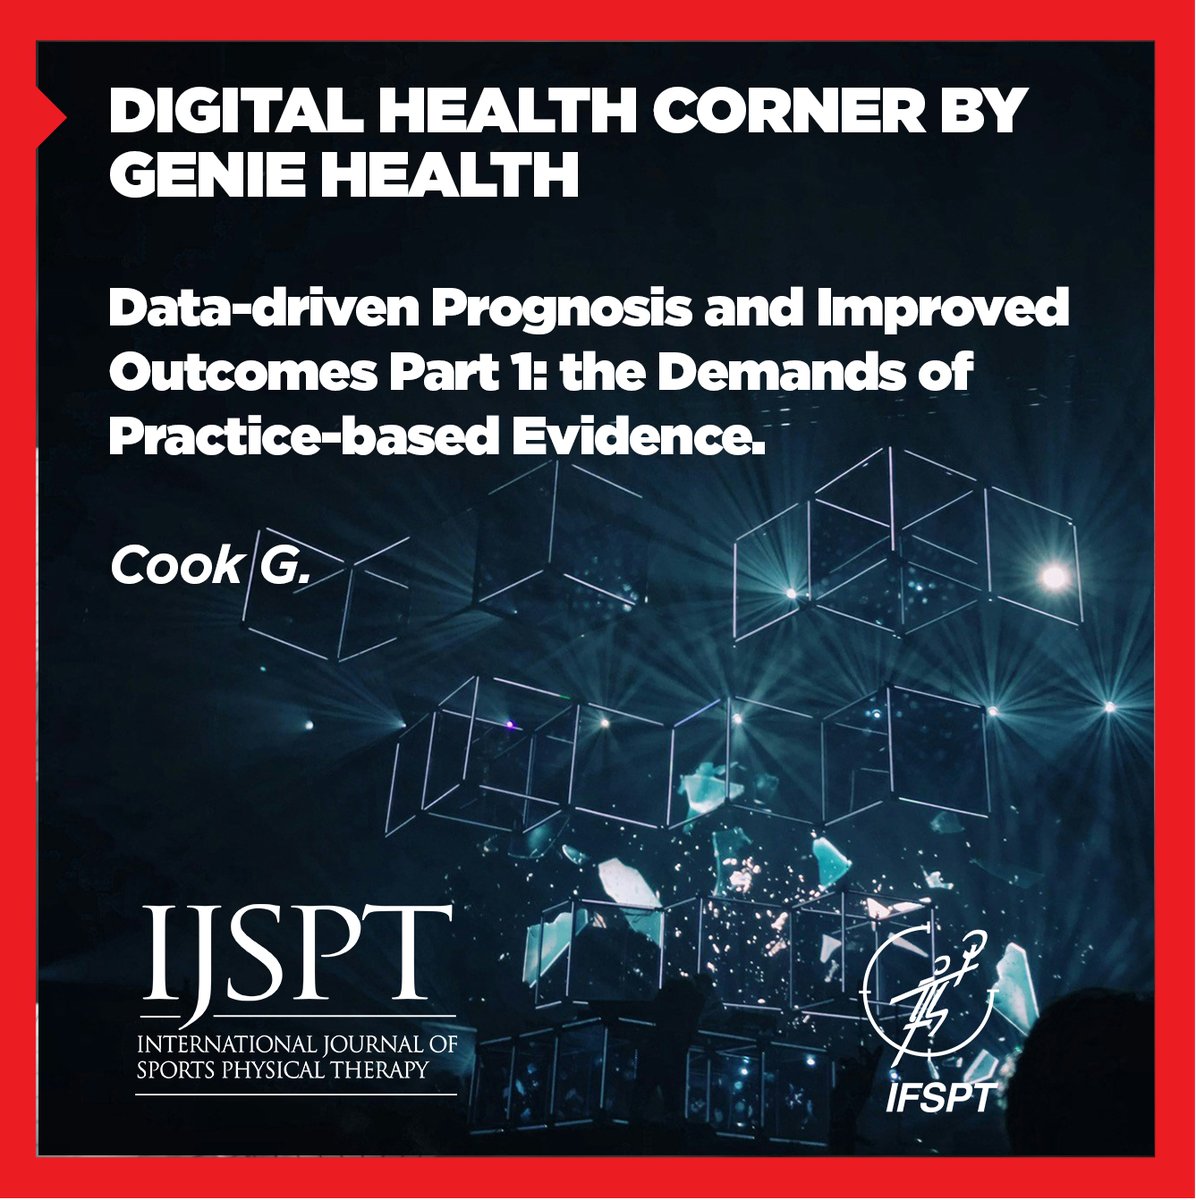 DIGITAL HEALTH CORNER BY GENIE HEALTH Data-driven Prognosis and Improved Outcomes Part 1: the Demands of Practice-based Evidence. Cook G ijspt.org/data-driven-pr…